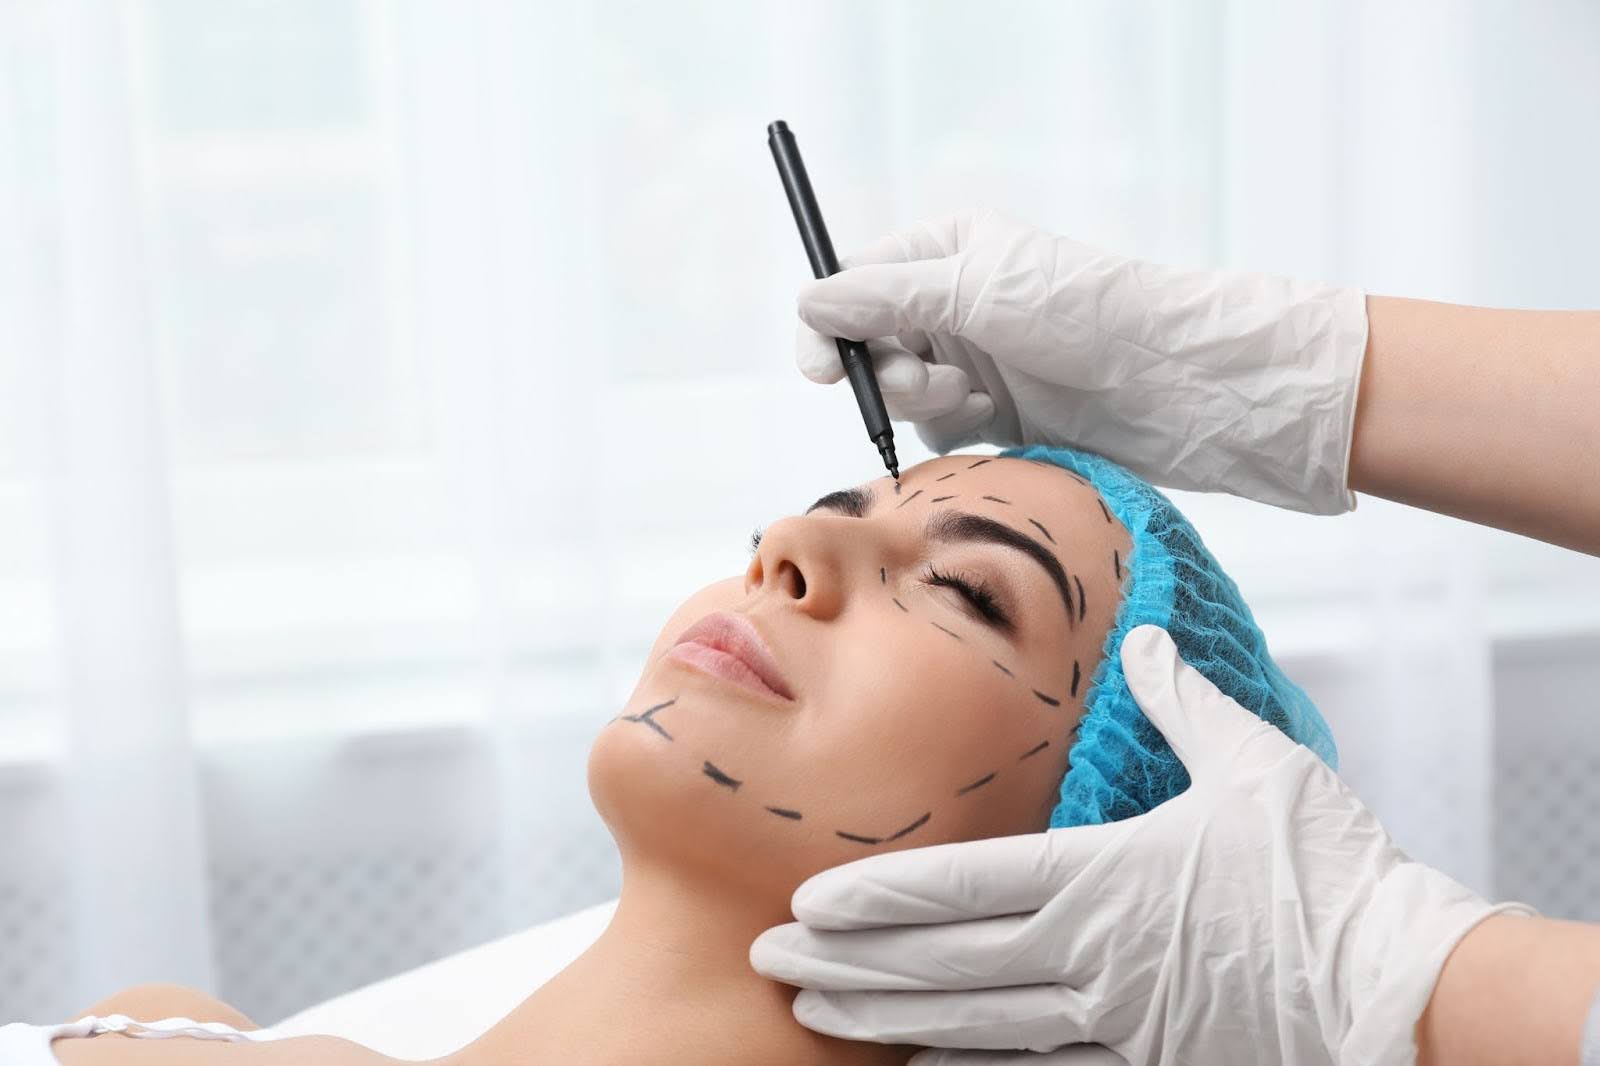 Getting Your Plastic Surgery Covered by Medical Insurance